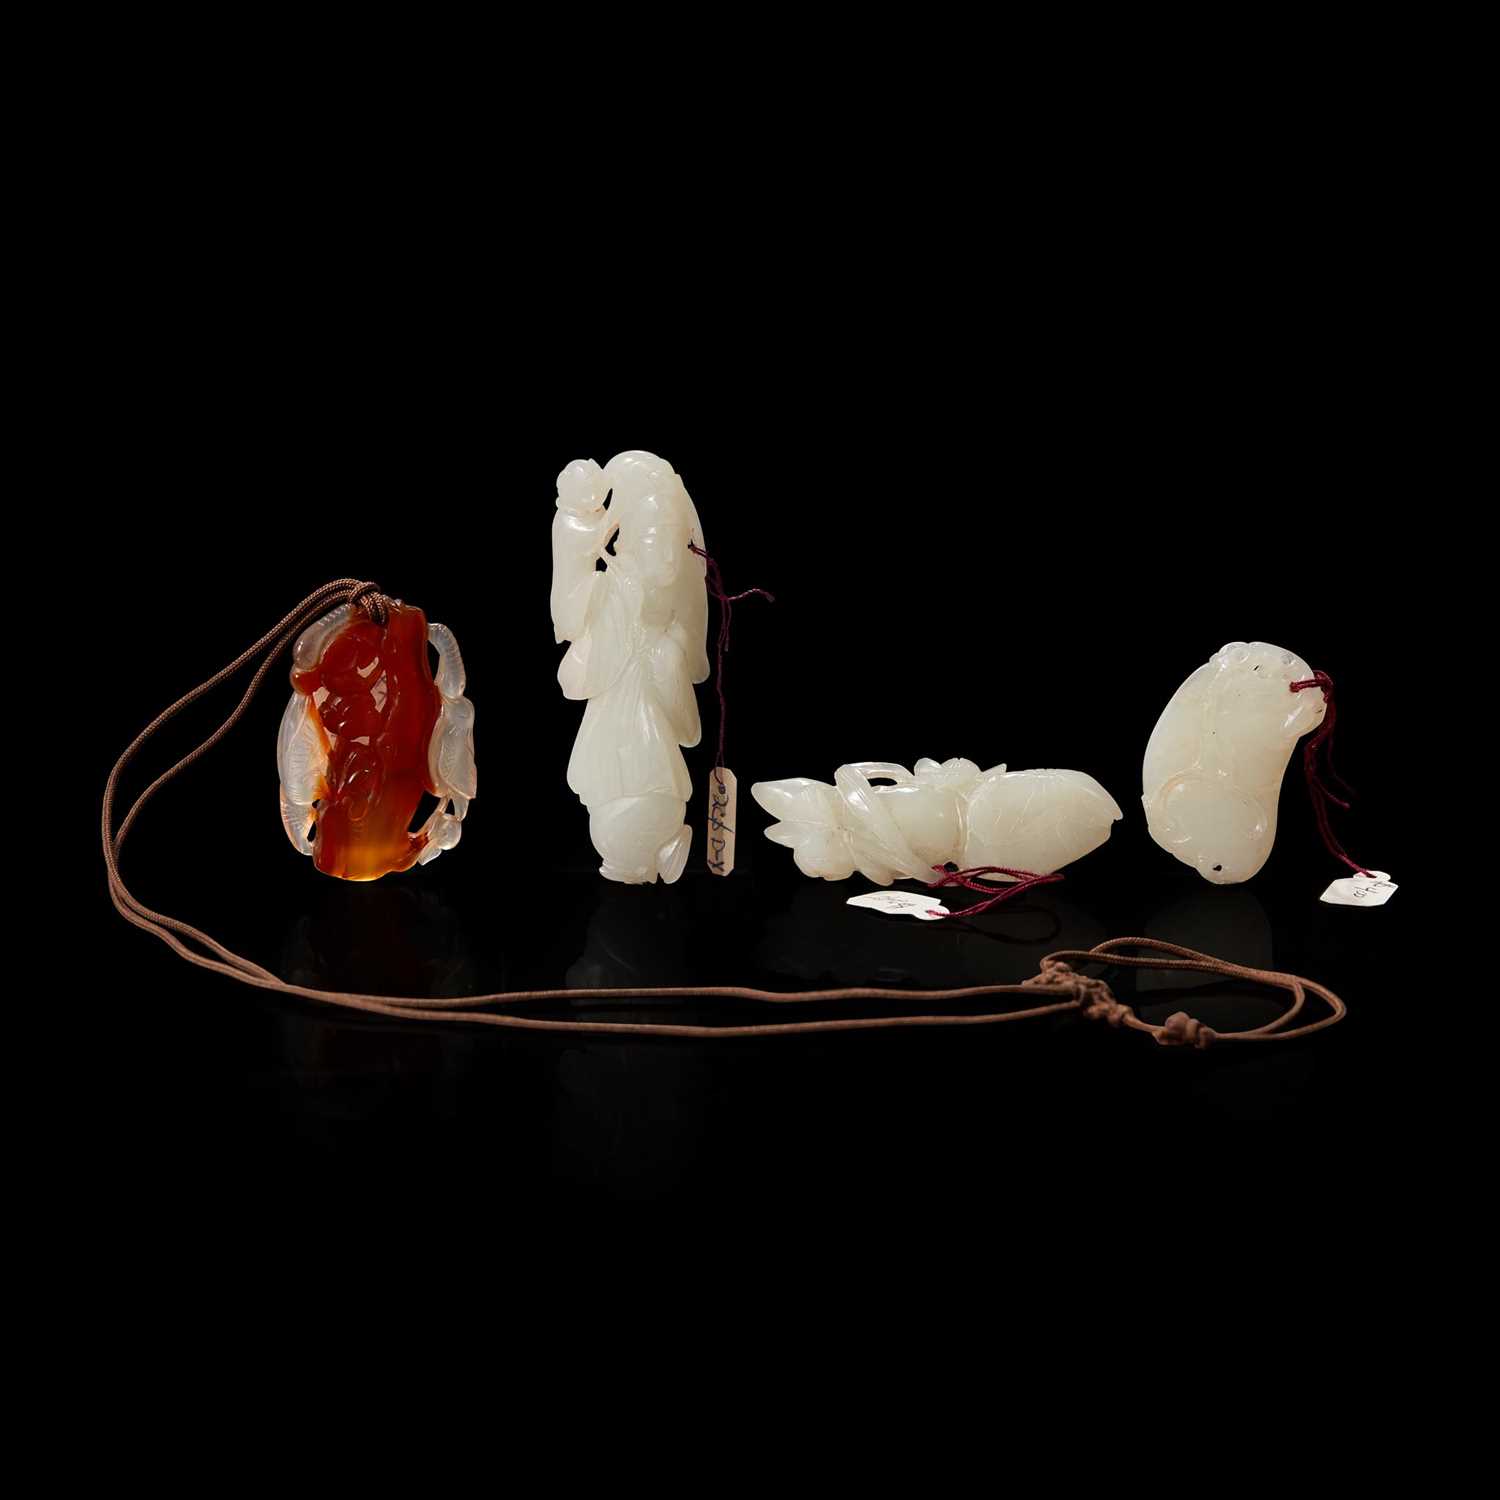 Lot 132 - A group of three Chinese white jade carvings and a carnelian pendant